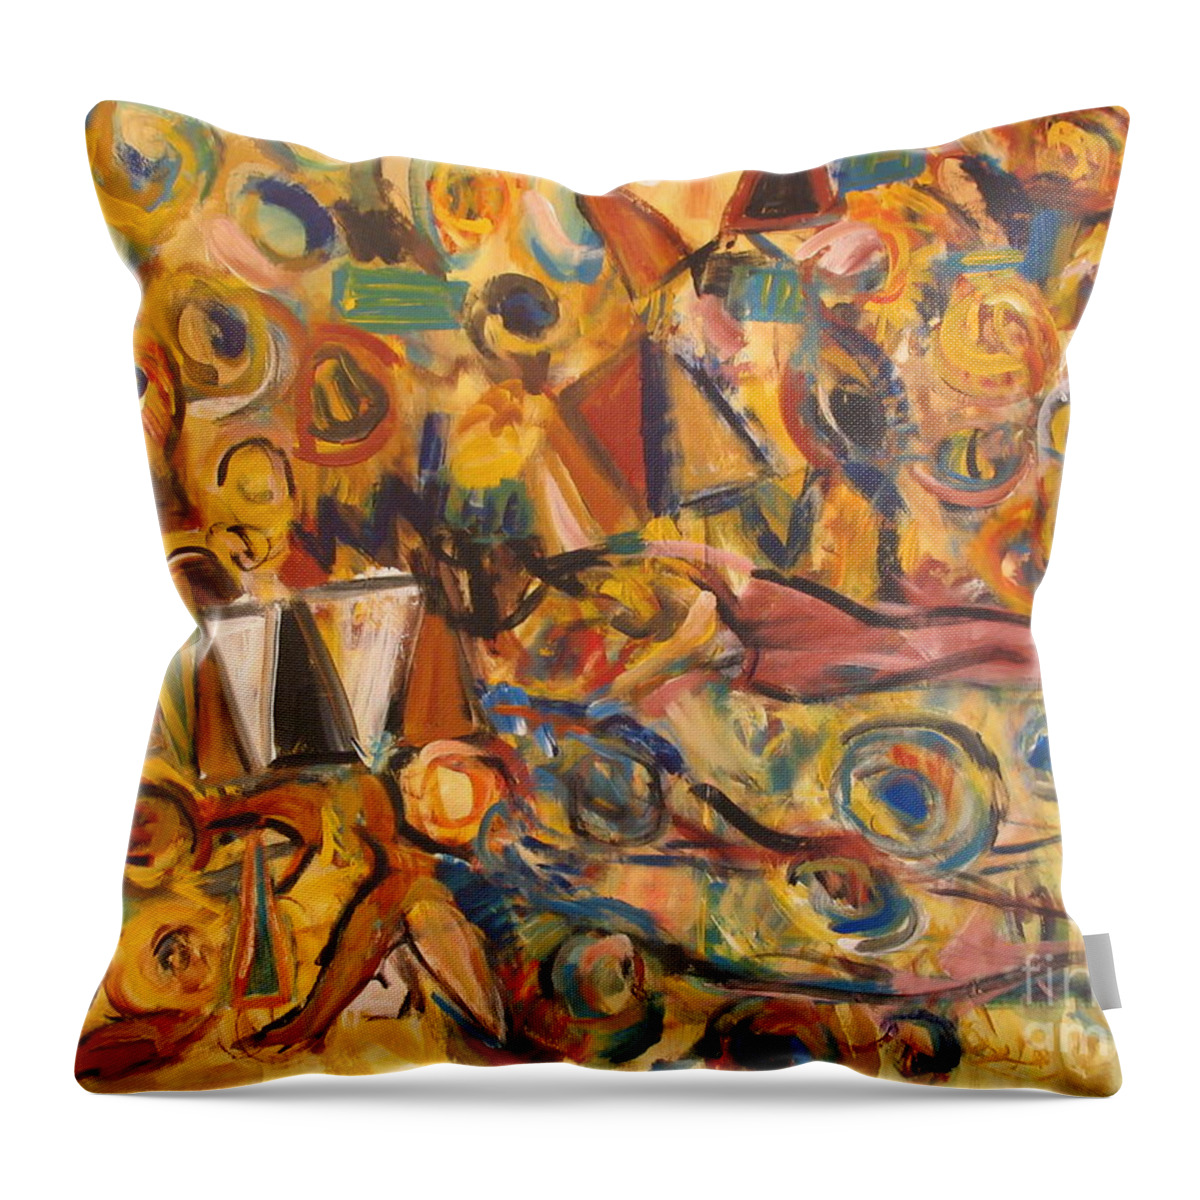 Land Scape Throw Pillow featuring the painting Sun- Bathing Among Yellow Roses by Fereshteh Stoecklein